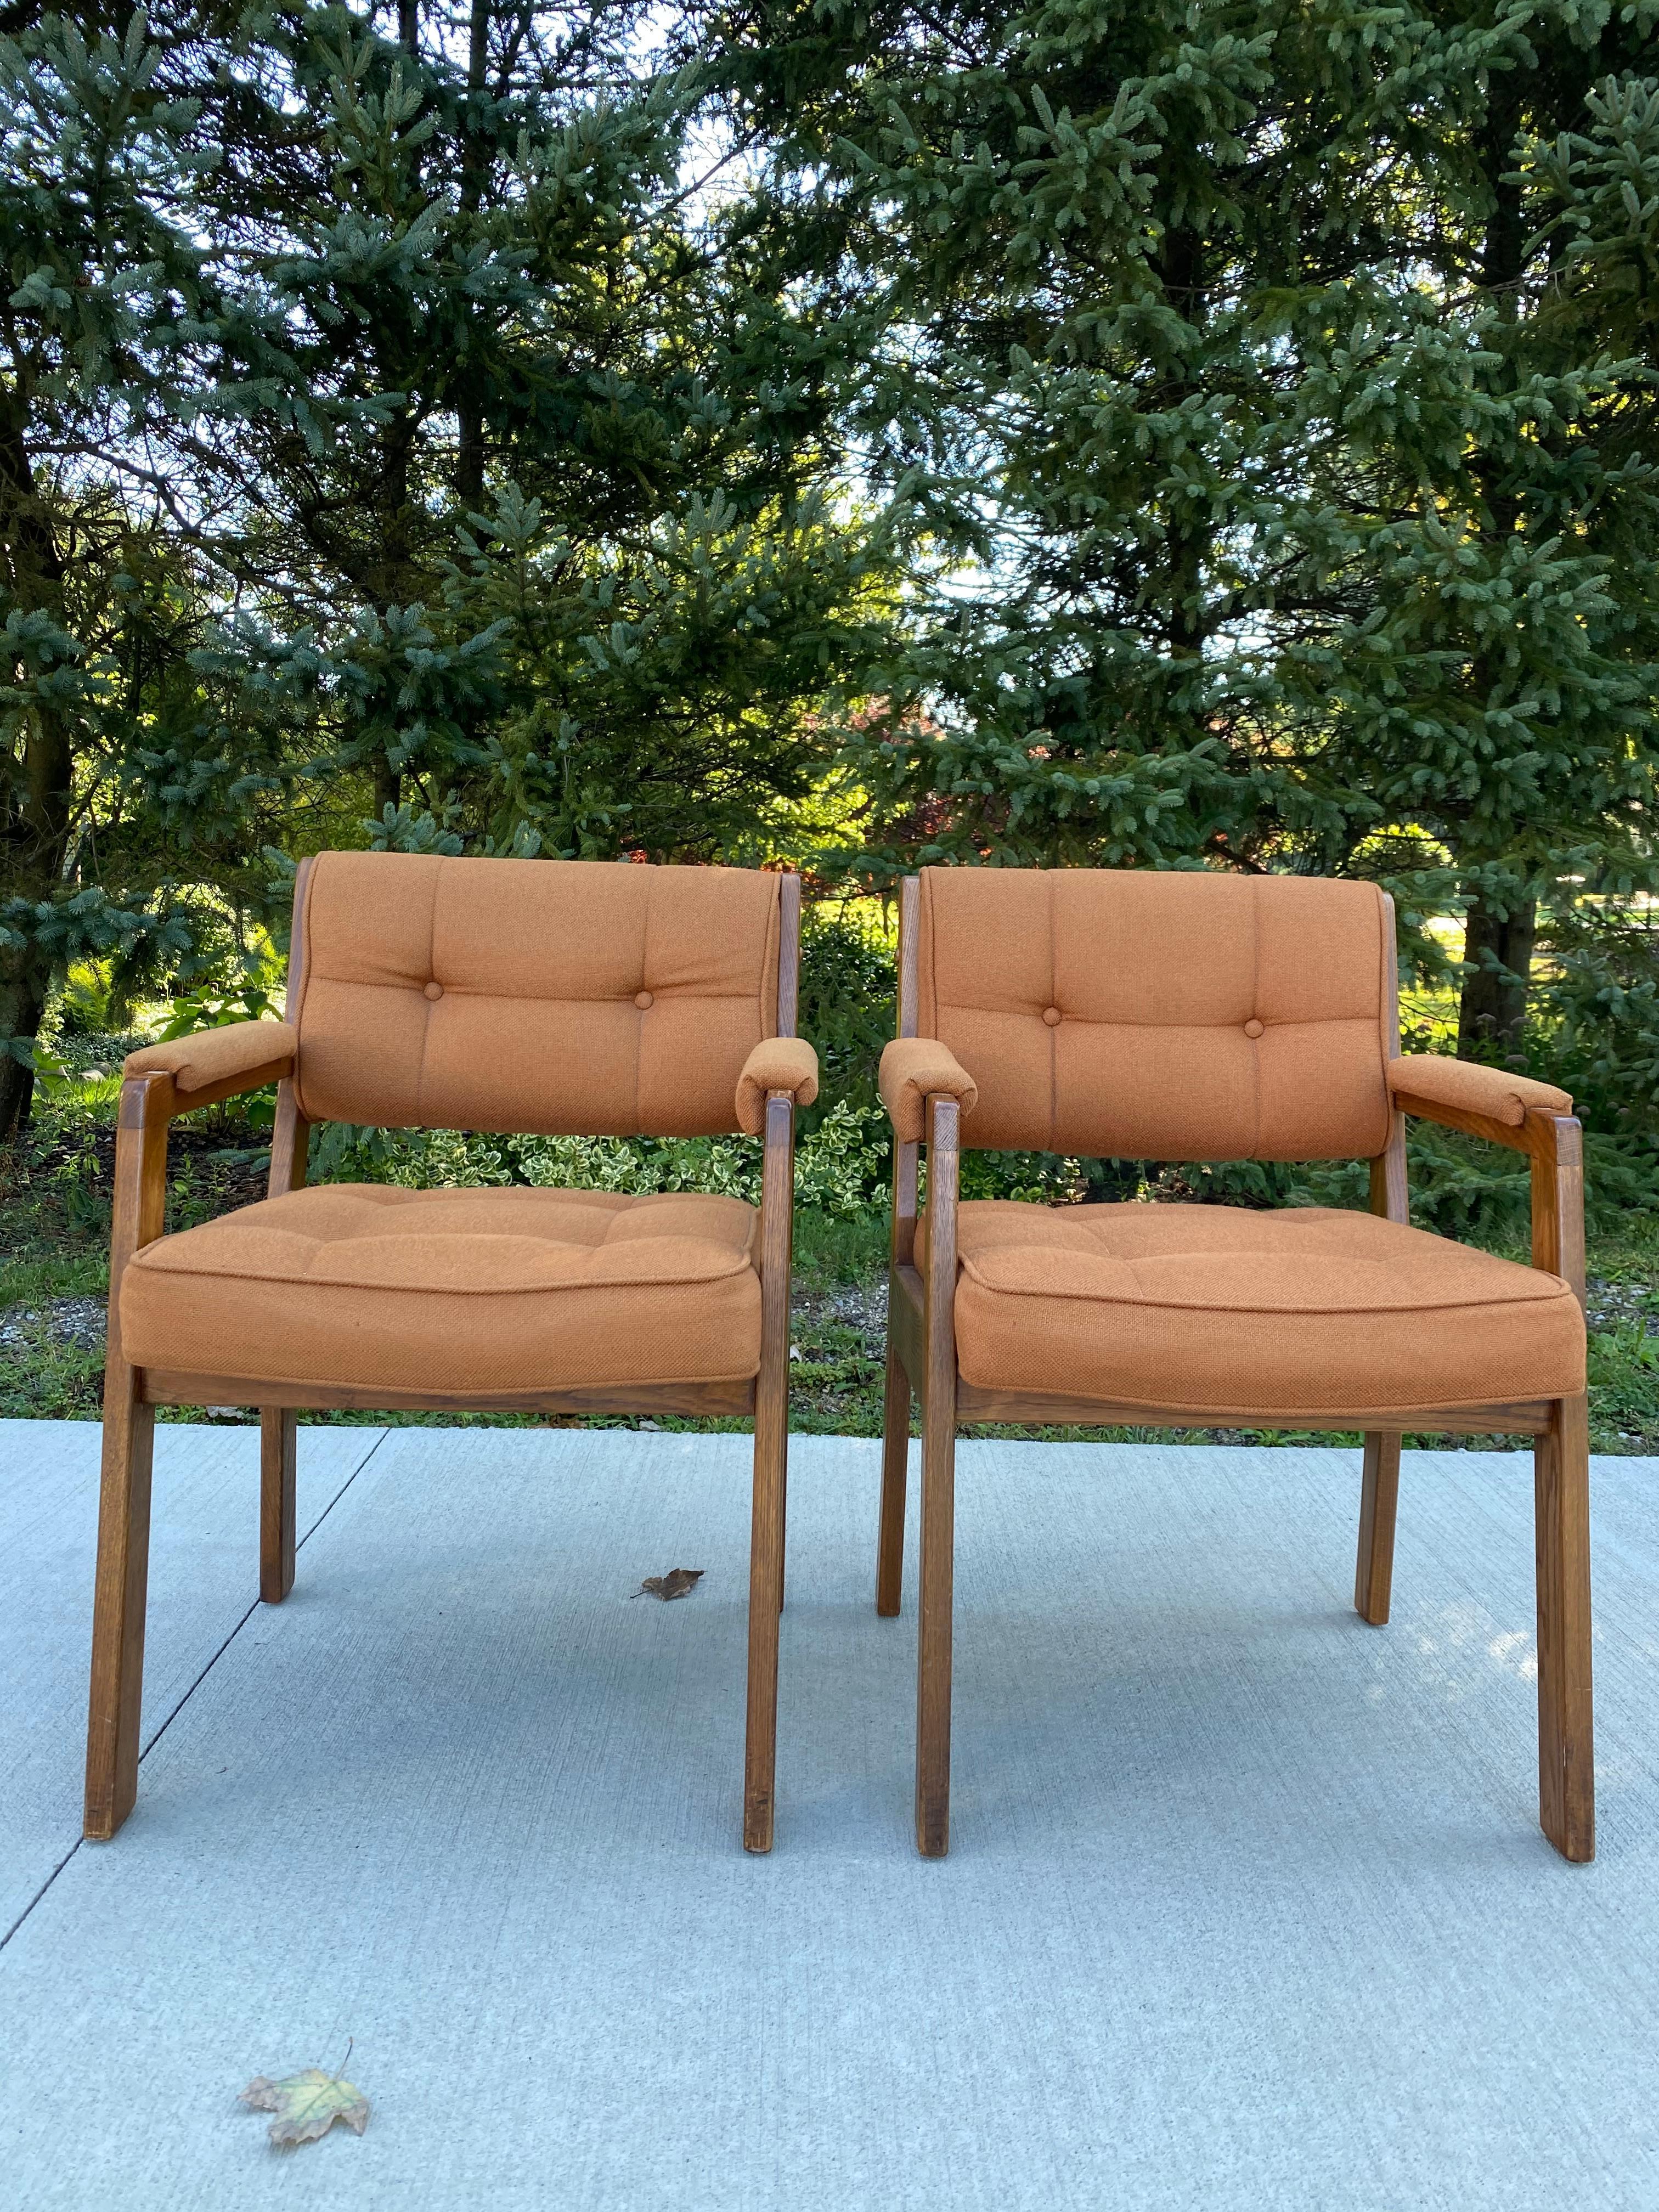 Set of 2 orange Mid-Century Modern style accent chairs in an eye-catching orange fabric by La-Z-Boy. The chairs are very sturdy and comfortable. They have been cleaned but the right chair holds a light stain on its left and right arms, see picture.